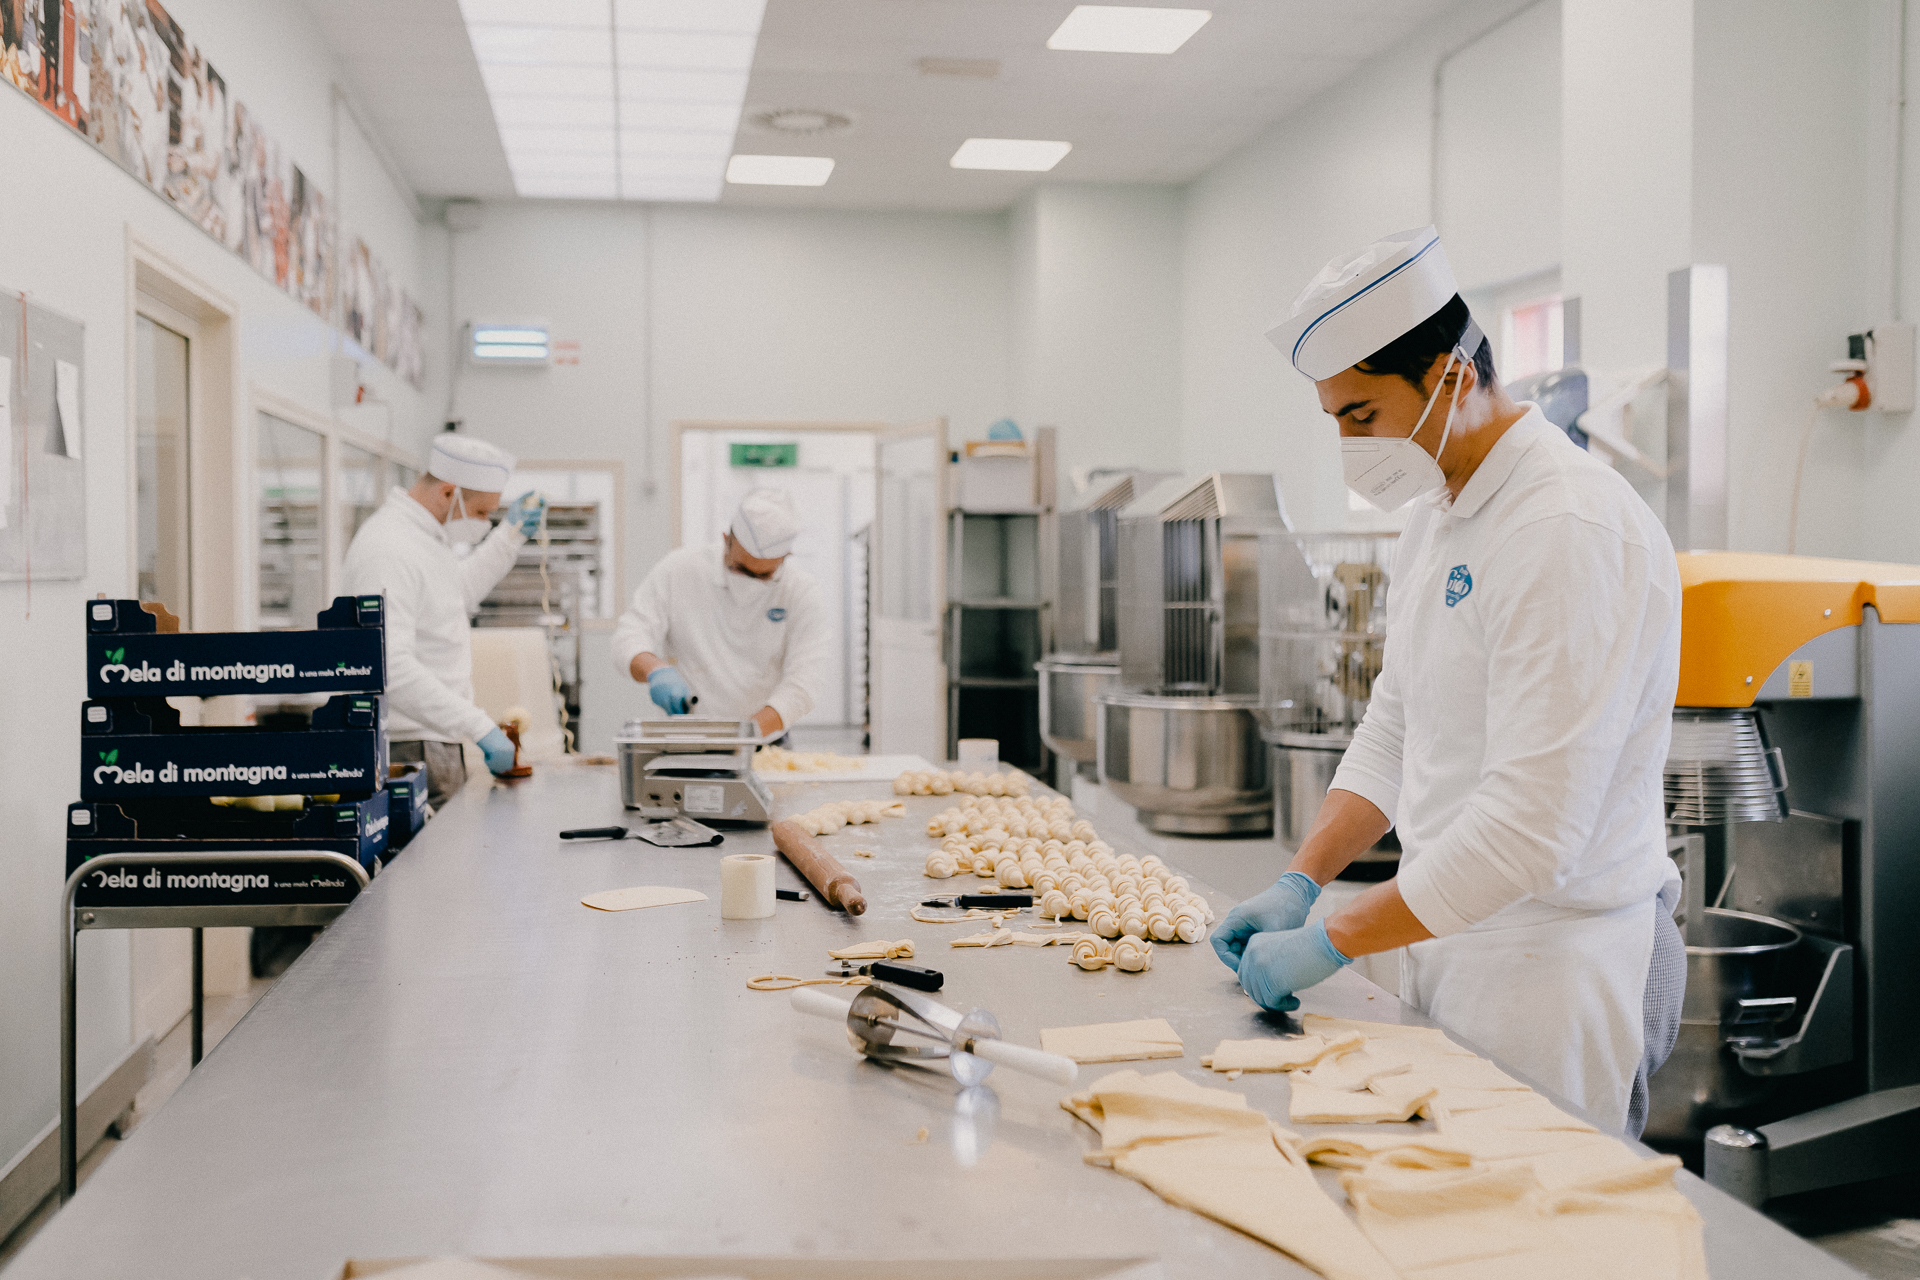 Giotto Bakery – a very long stainless steel work table where three inmates are diving croissant dough into portions and rolling it in shape.